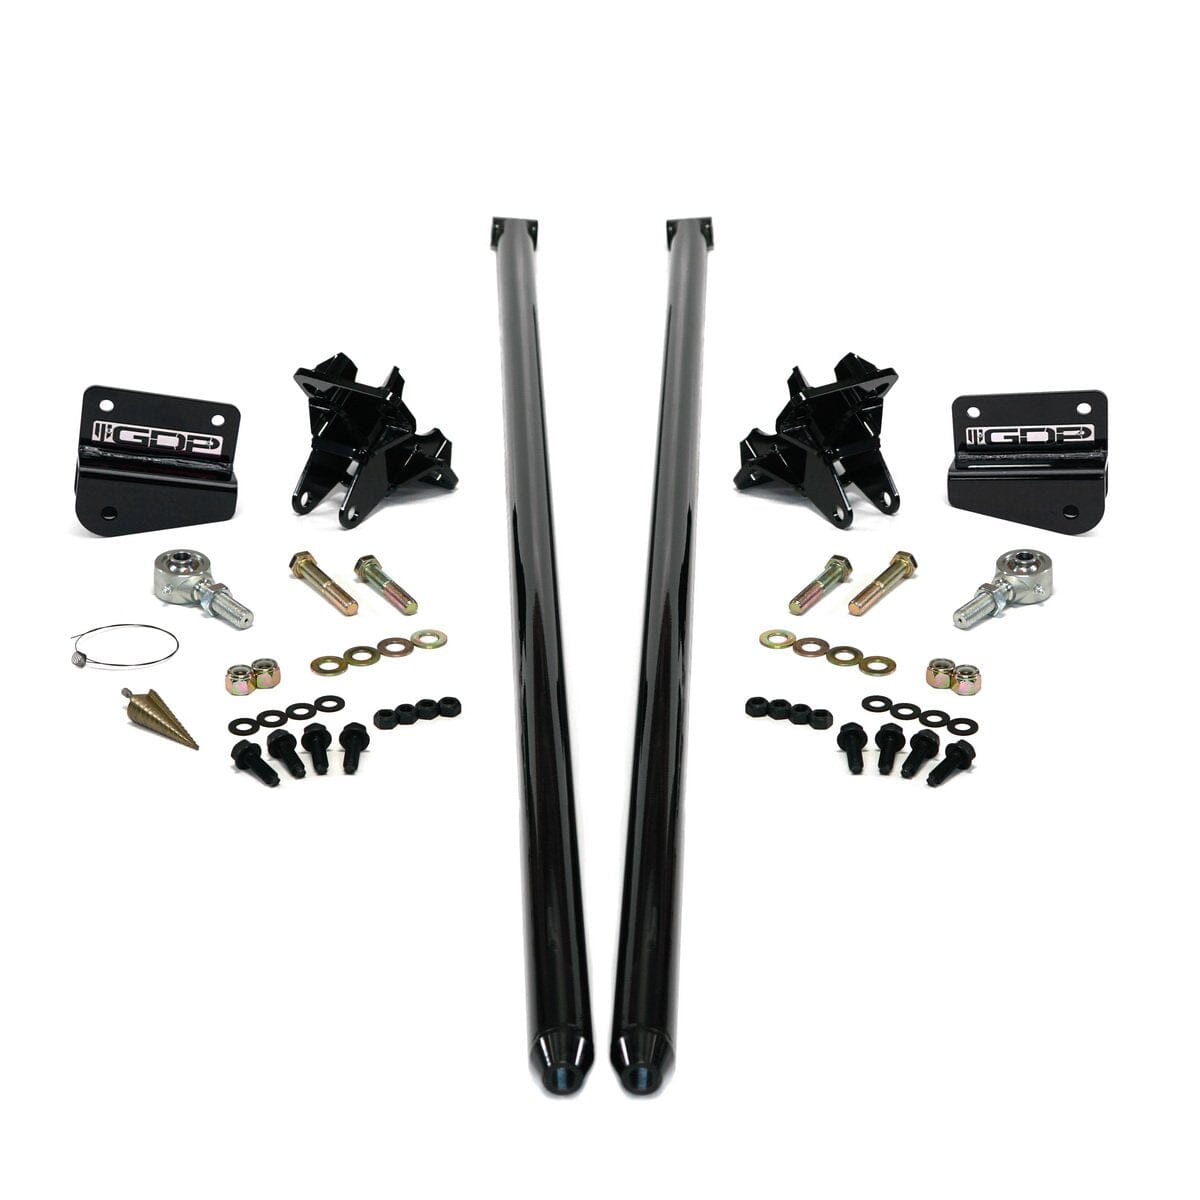 70" Bolt-on Traction Bars 4" Axle Diameter (2011-2019 6.6L Duramax) Traction Bars GDP Black 